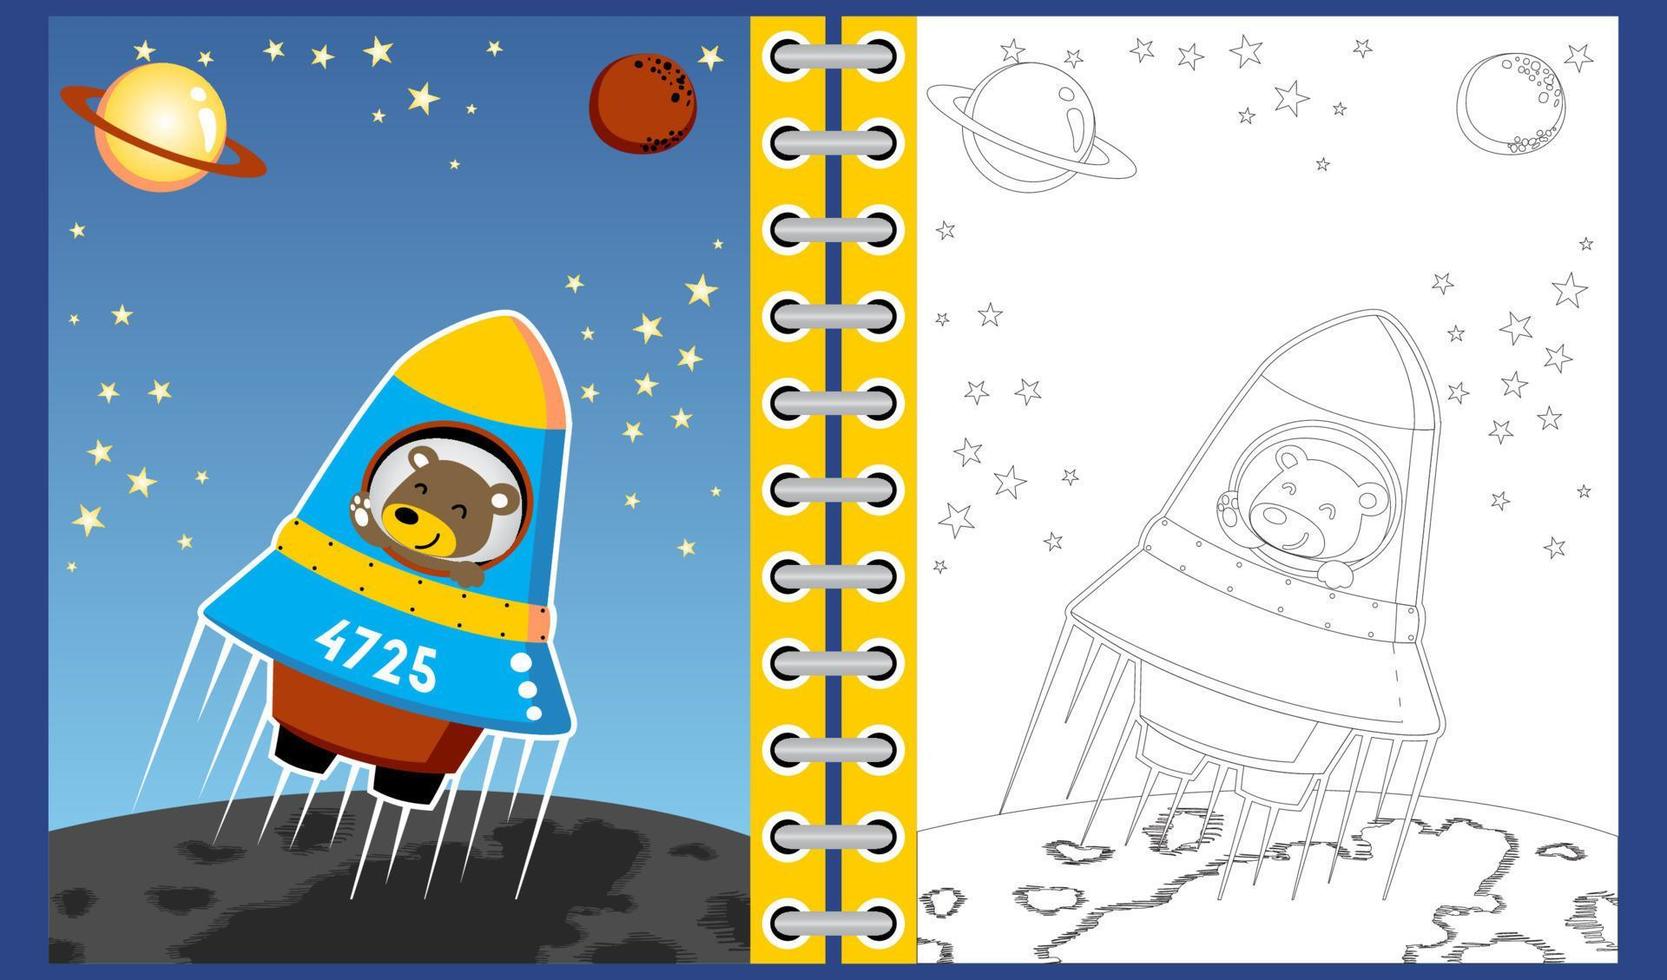 Funny bear astronaut cartoon on rocket in space, coloring book or page vector